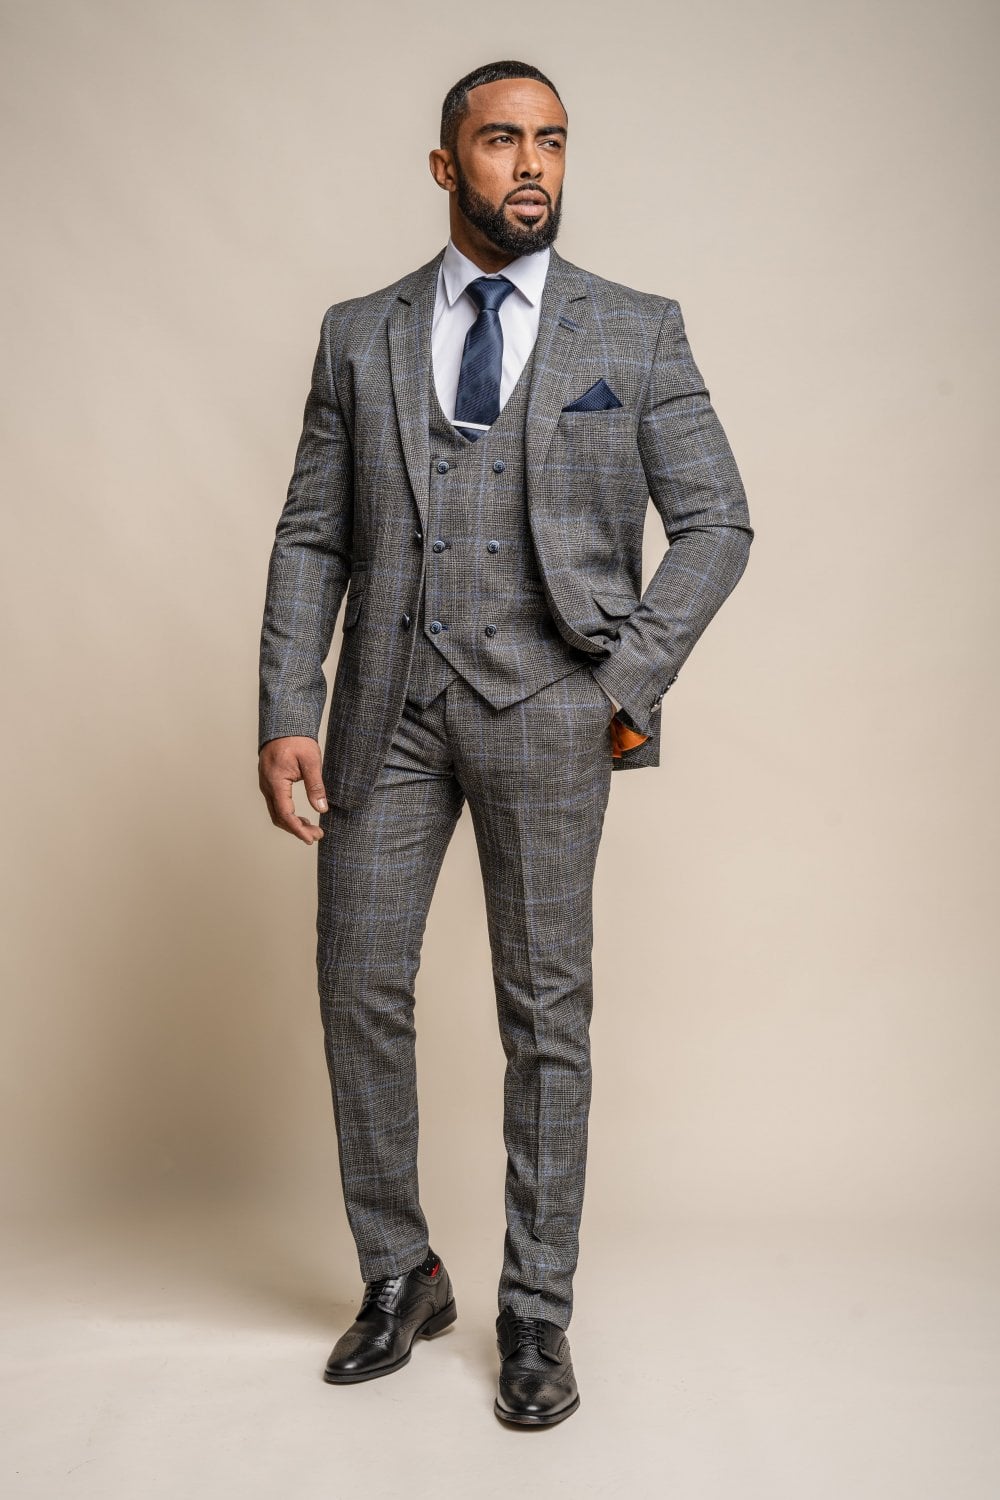 Power Grey Checked 3 Piece suit for hire (Price includes £40 deposit)